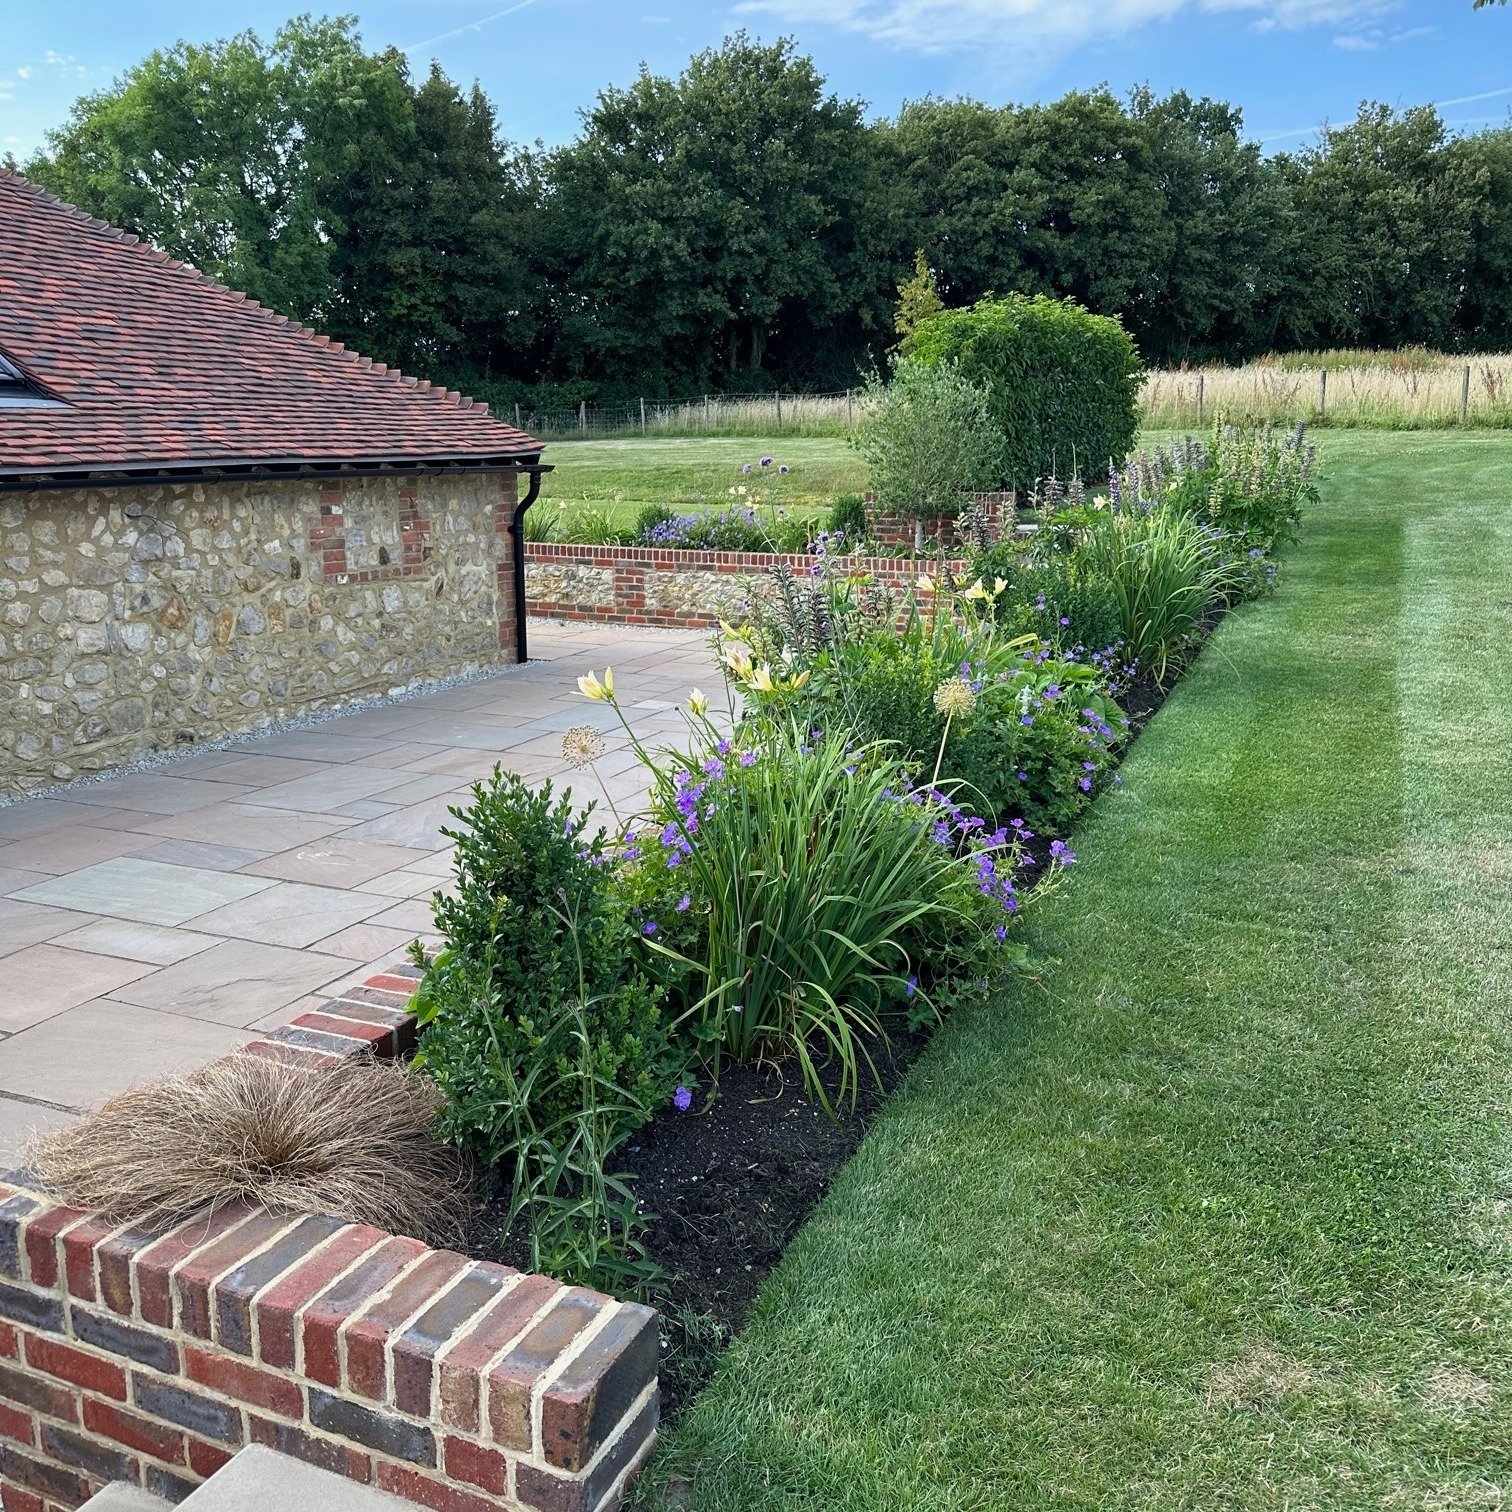 Today is #nationalgardeningday and thought what a great time to show you how the garden has progressed since we purchased and moved into Elvey Farm at the end of 2019. From major landscaping to planting new trees and hedges, to creating a wildflower 